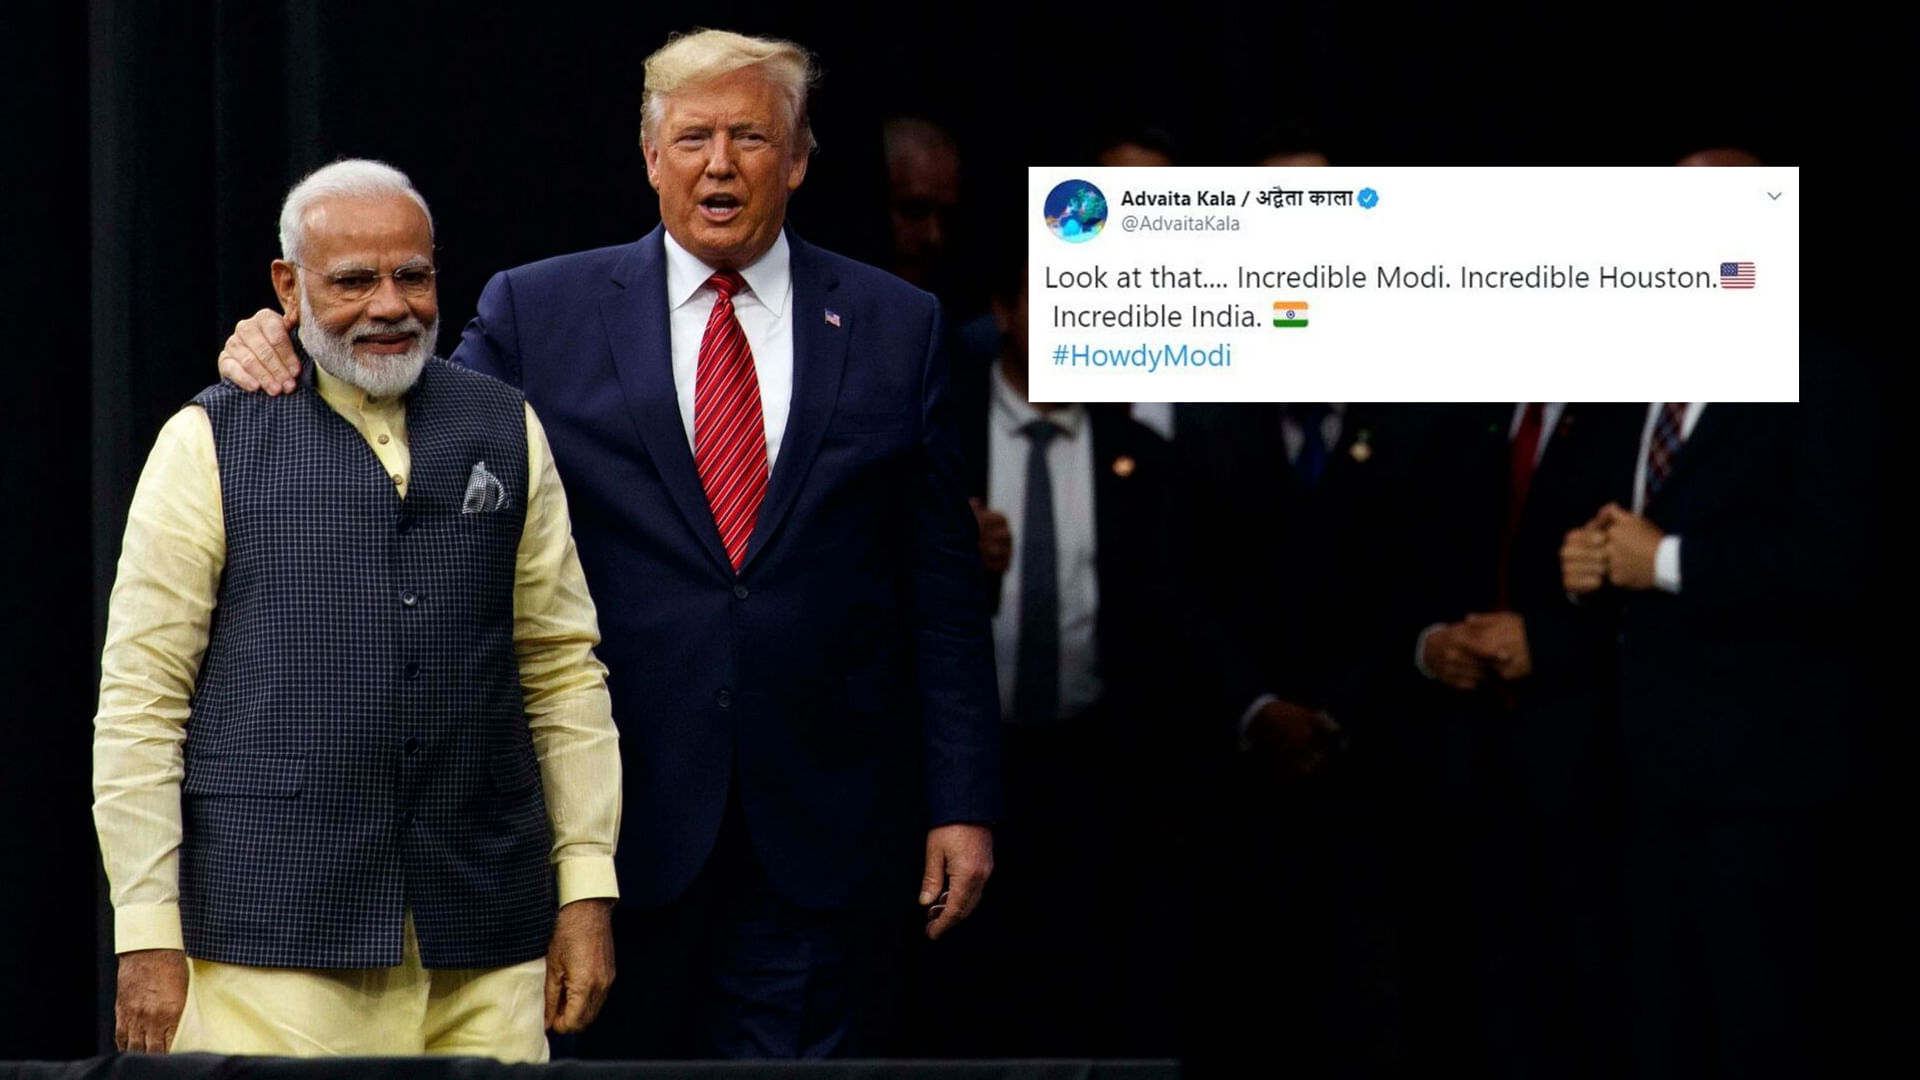 PM Modi and US President Donald Trump addressed the Indian diaspora at the ‘Howdy, Modi’ event in Houston, Texas.